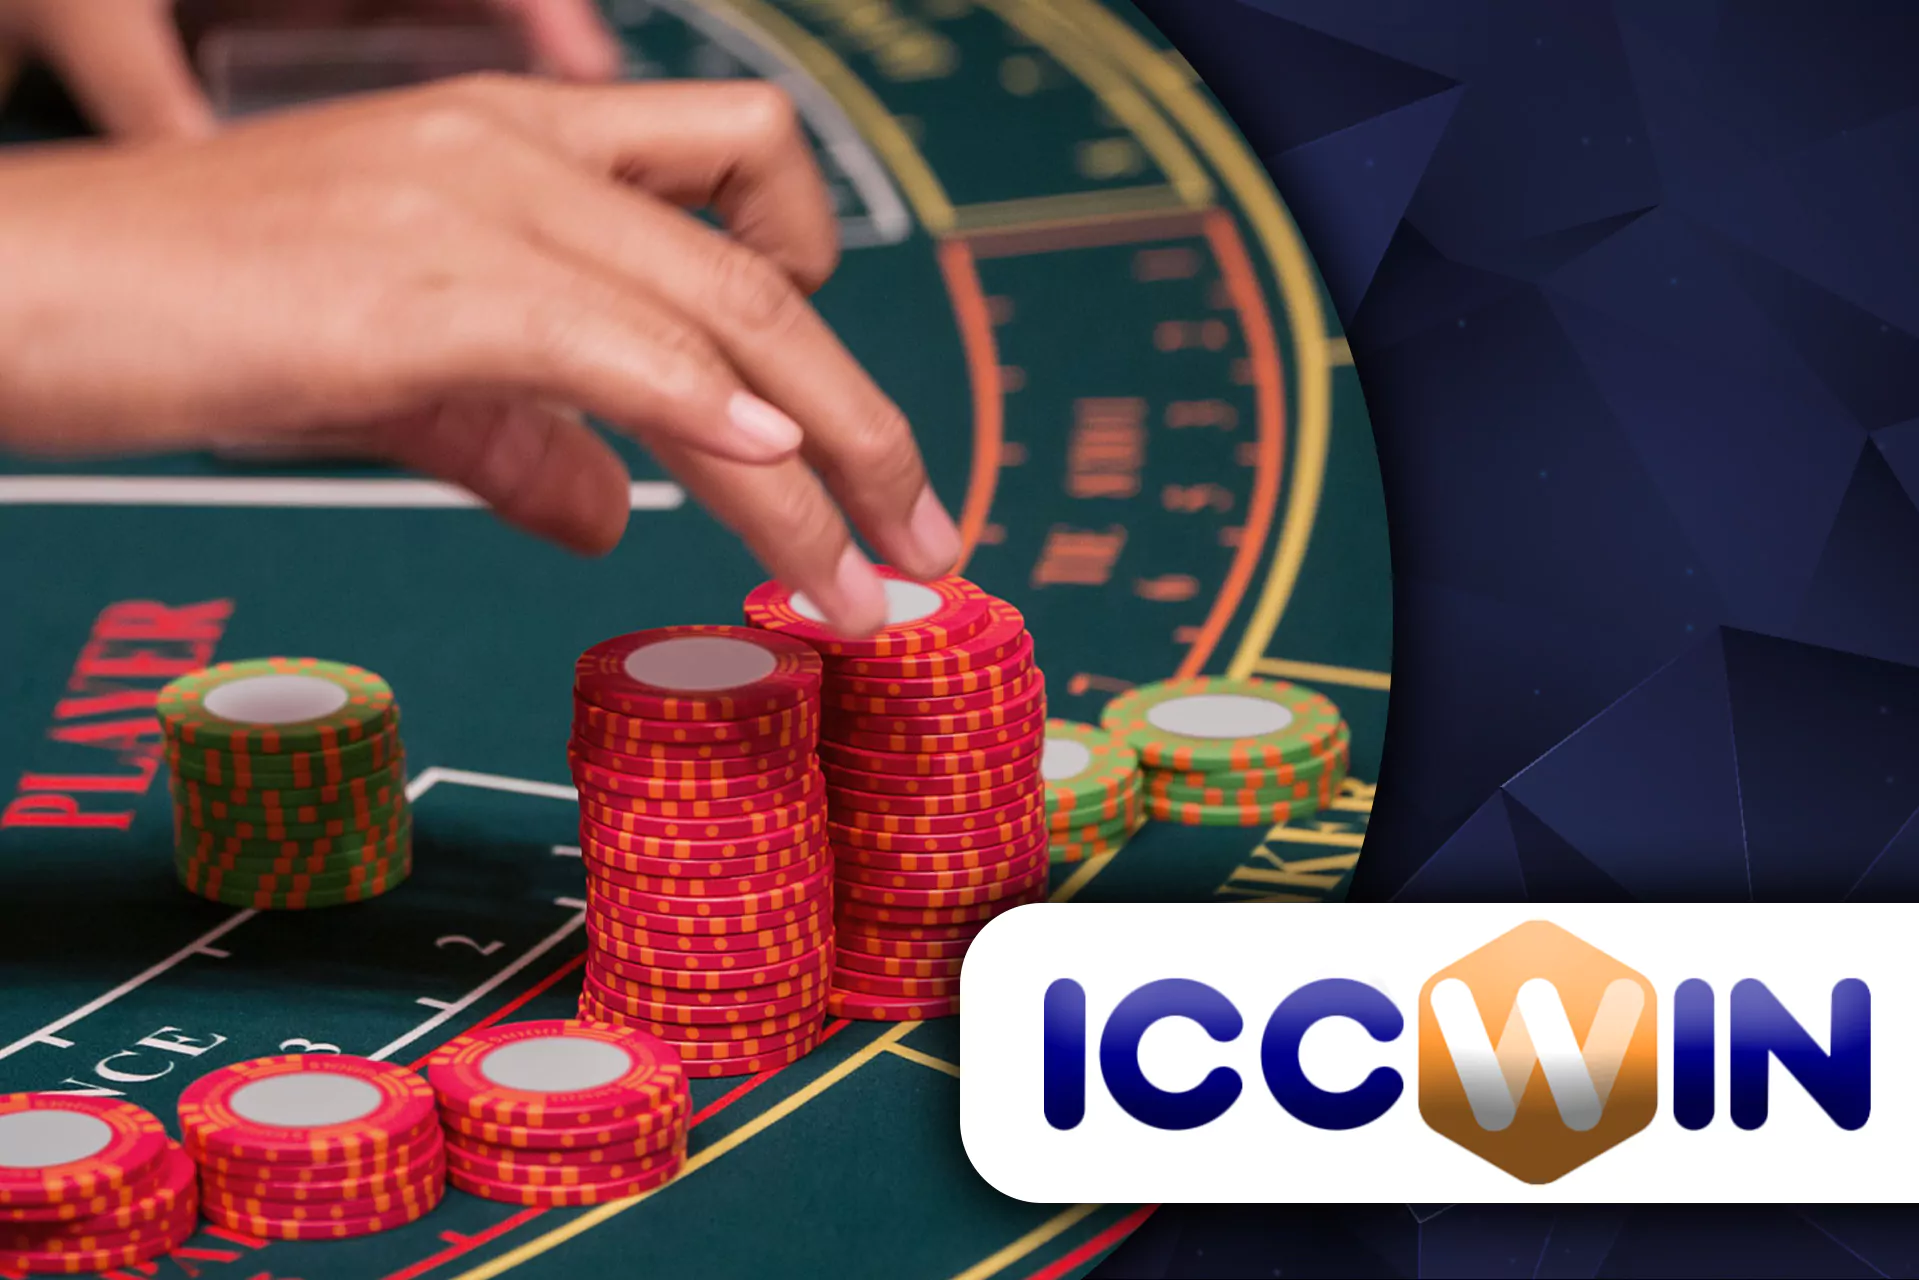 ICCWIN casino offers baccarat to play.